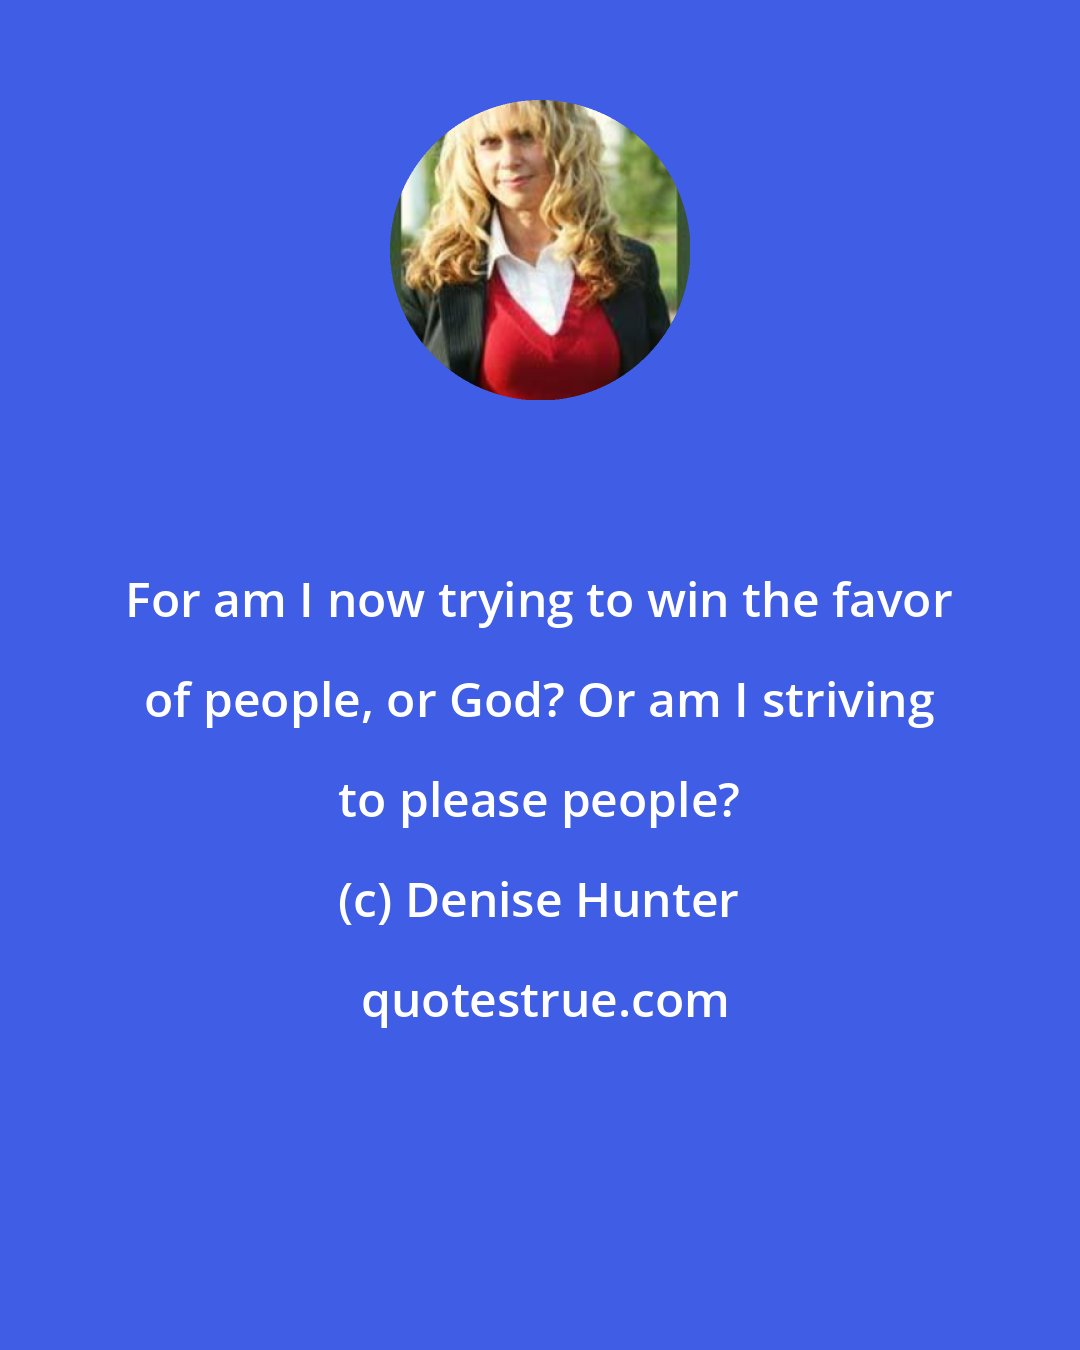 Denise Hunter: For am I now trying to win the favor of people, or God? Or am I striving to please people?